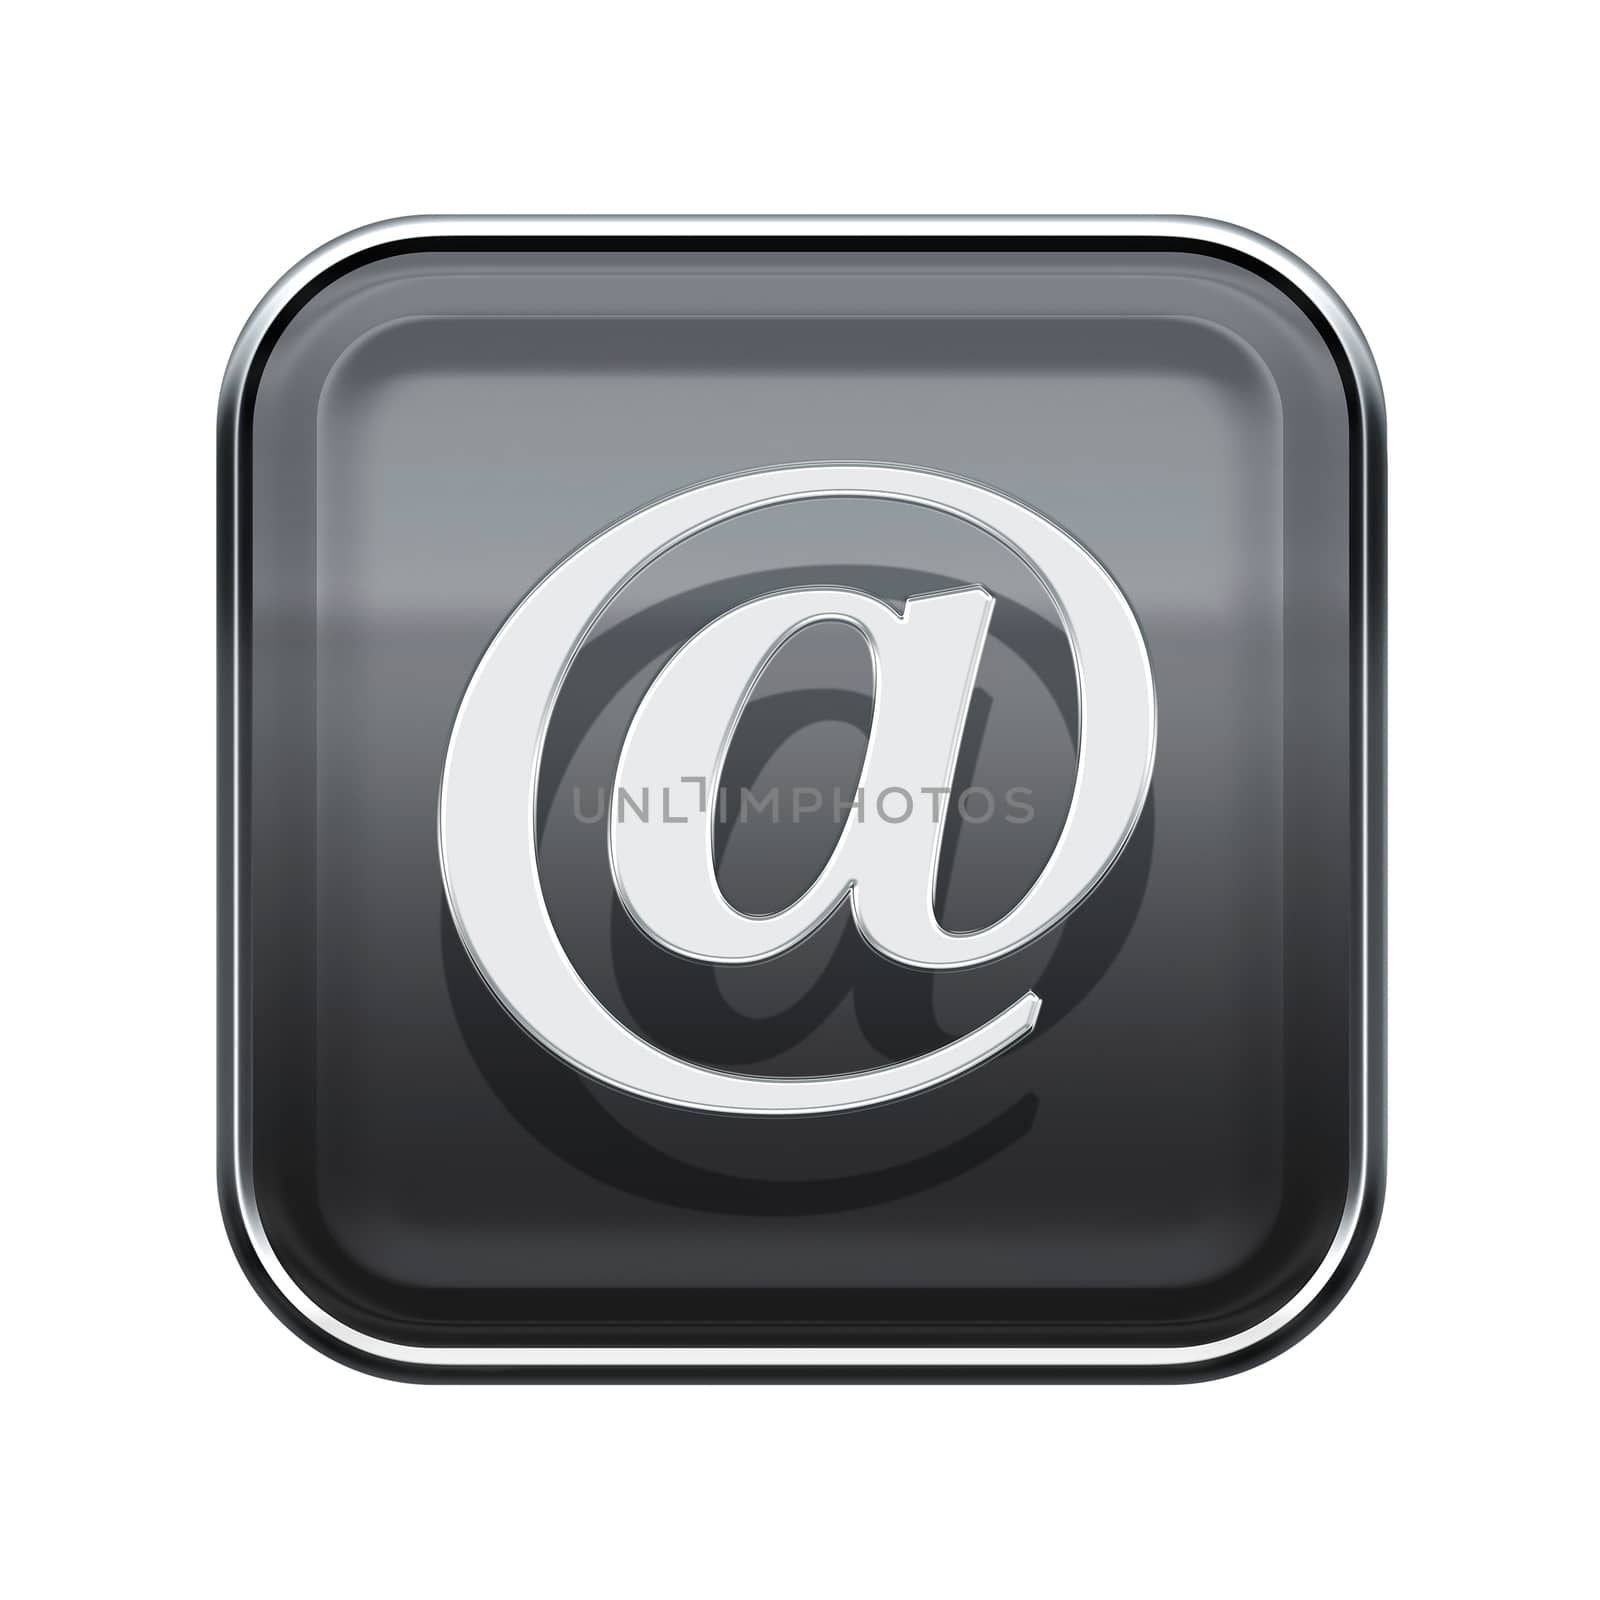 Email symbol icon glossy grey, isolated on white background